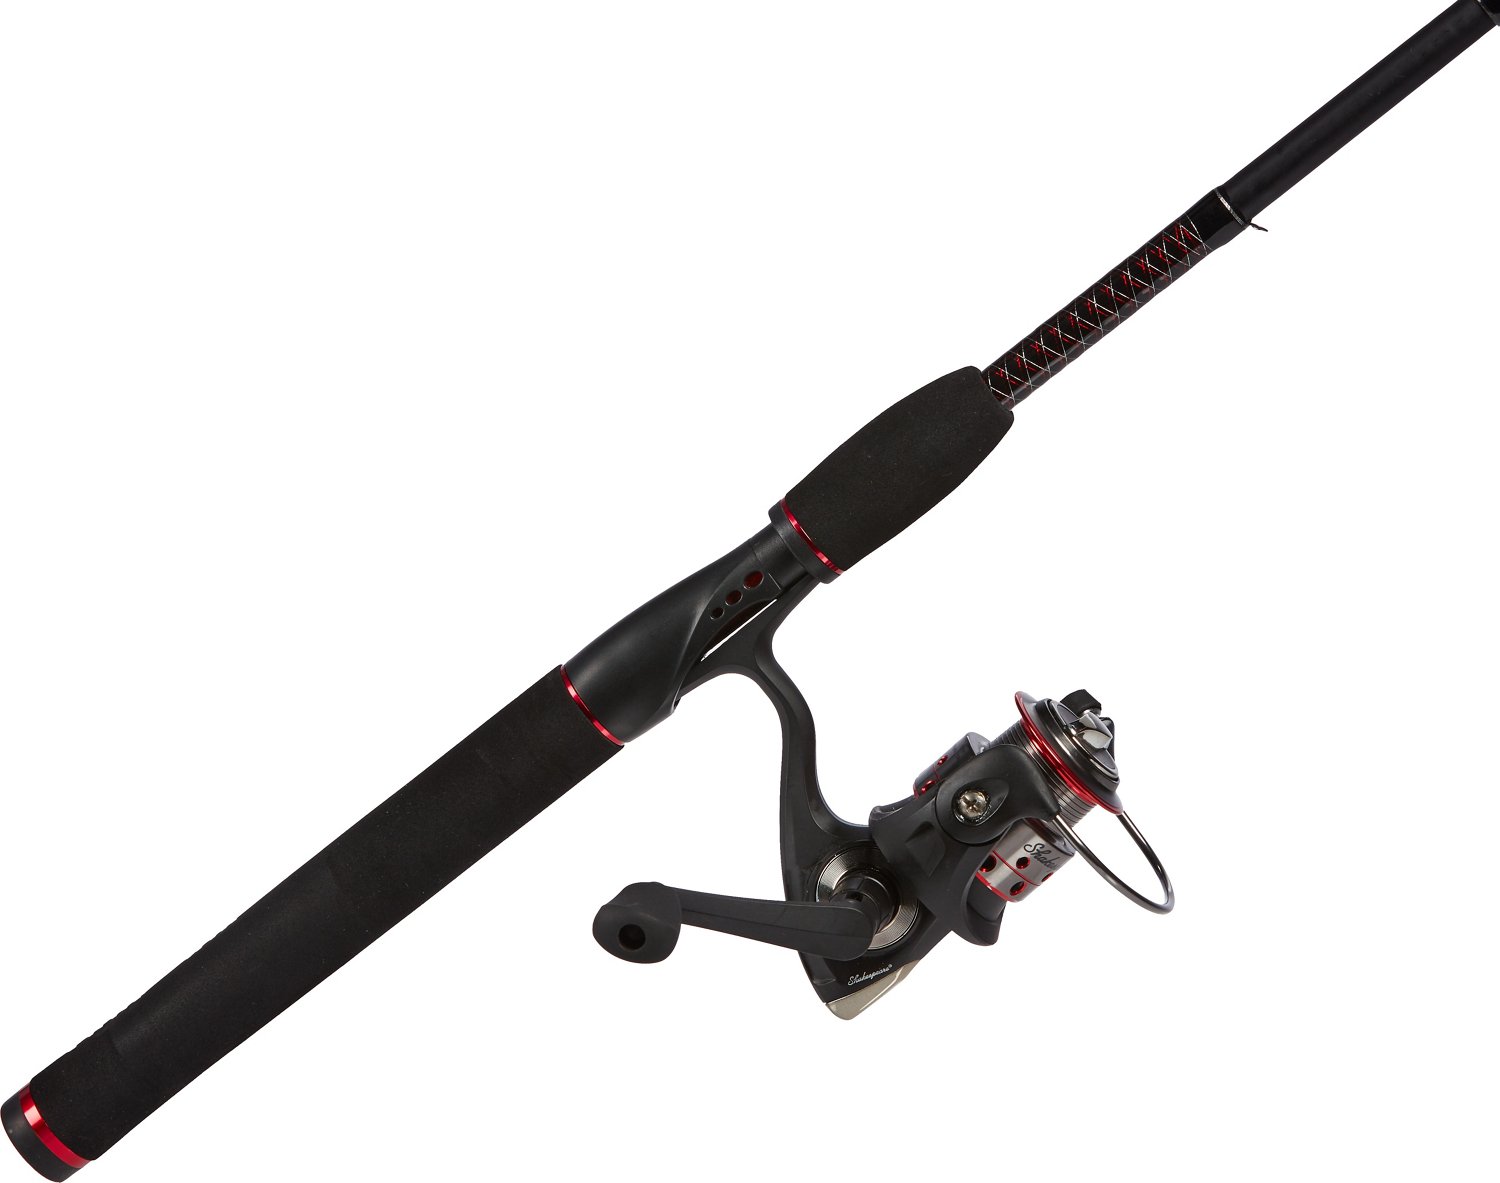 I'm new to this. Bought an ugly stik GX-2 6'6' travel combo, have